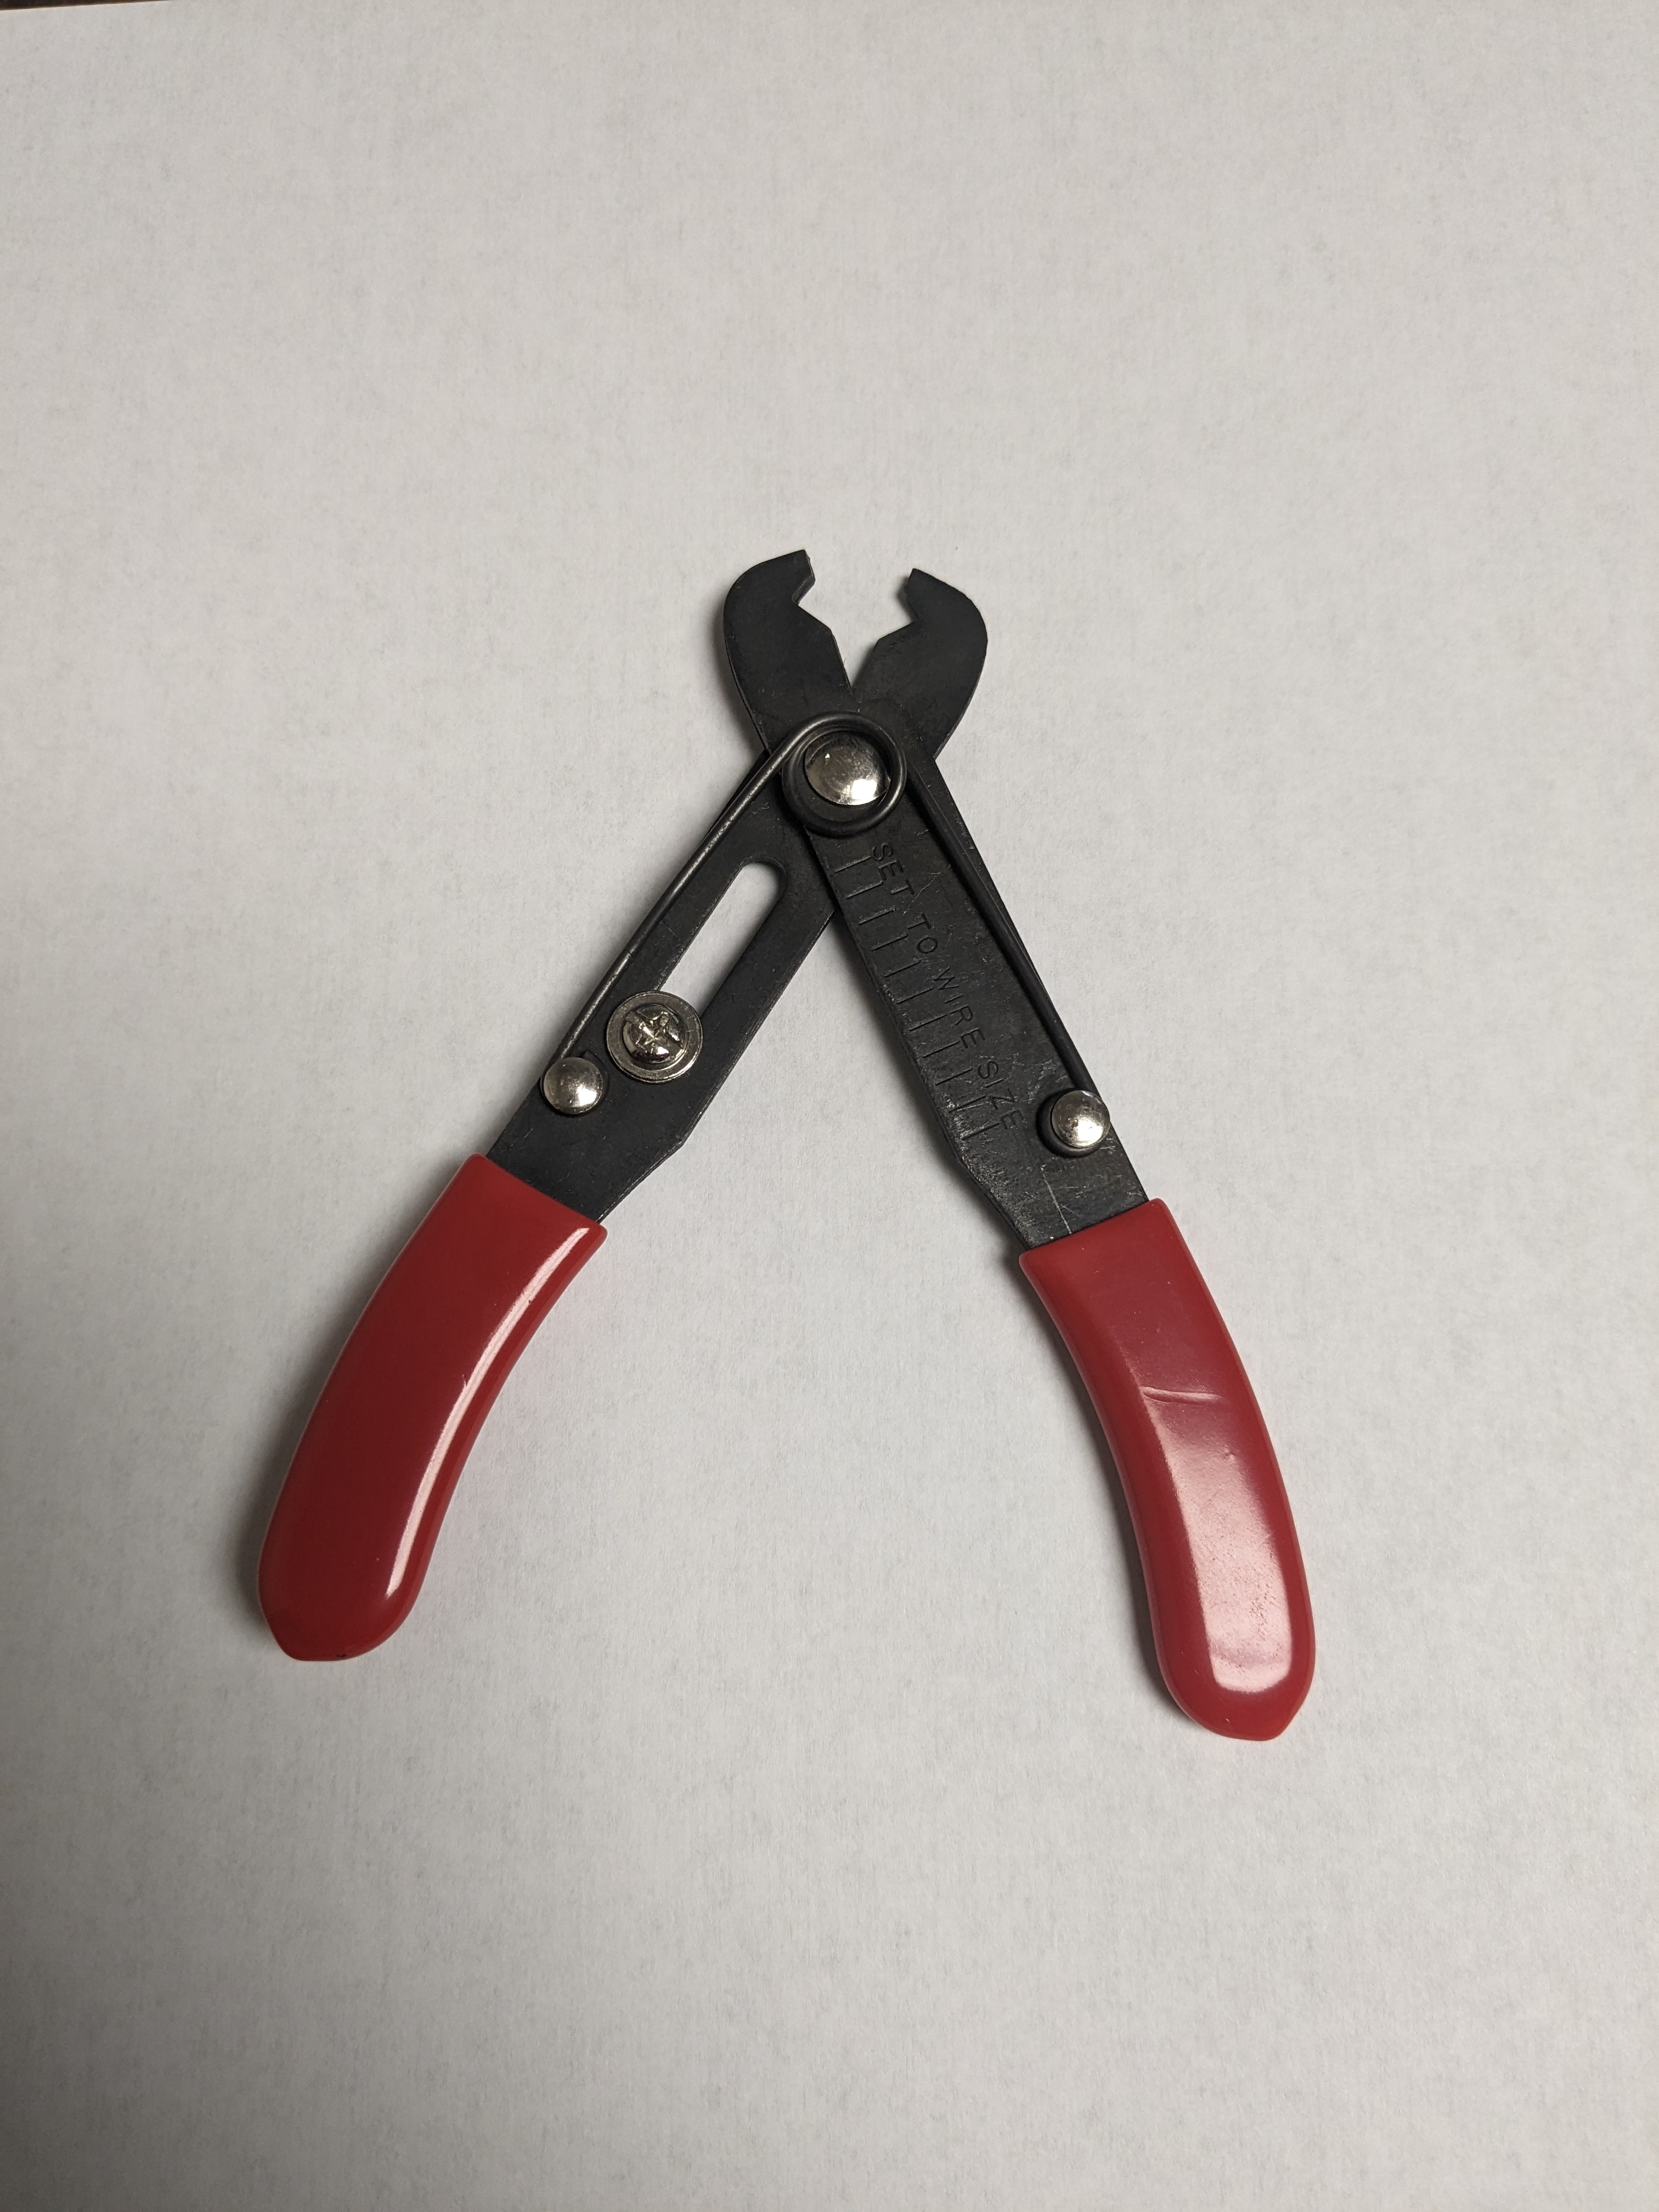 Adjustable Wire Strippers